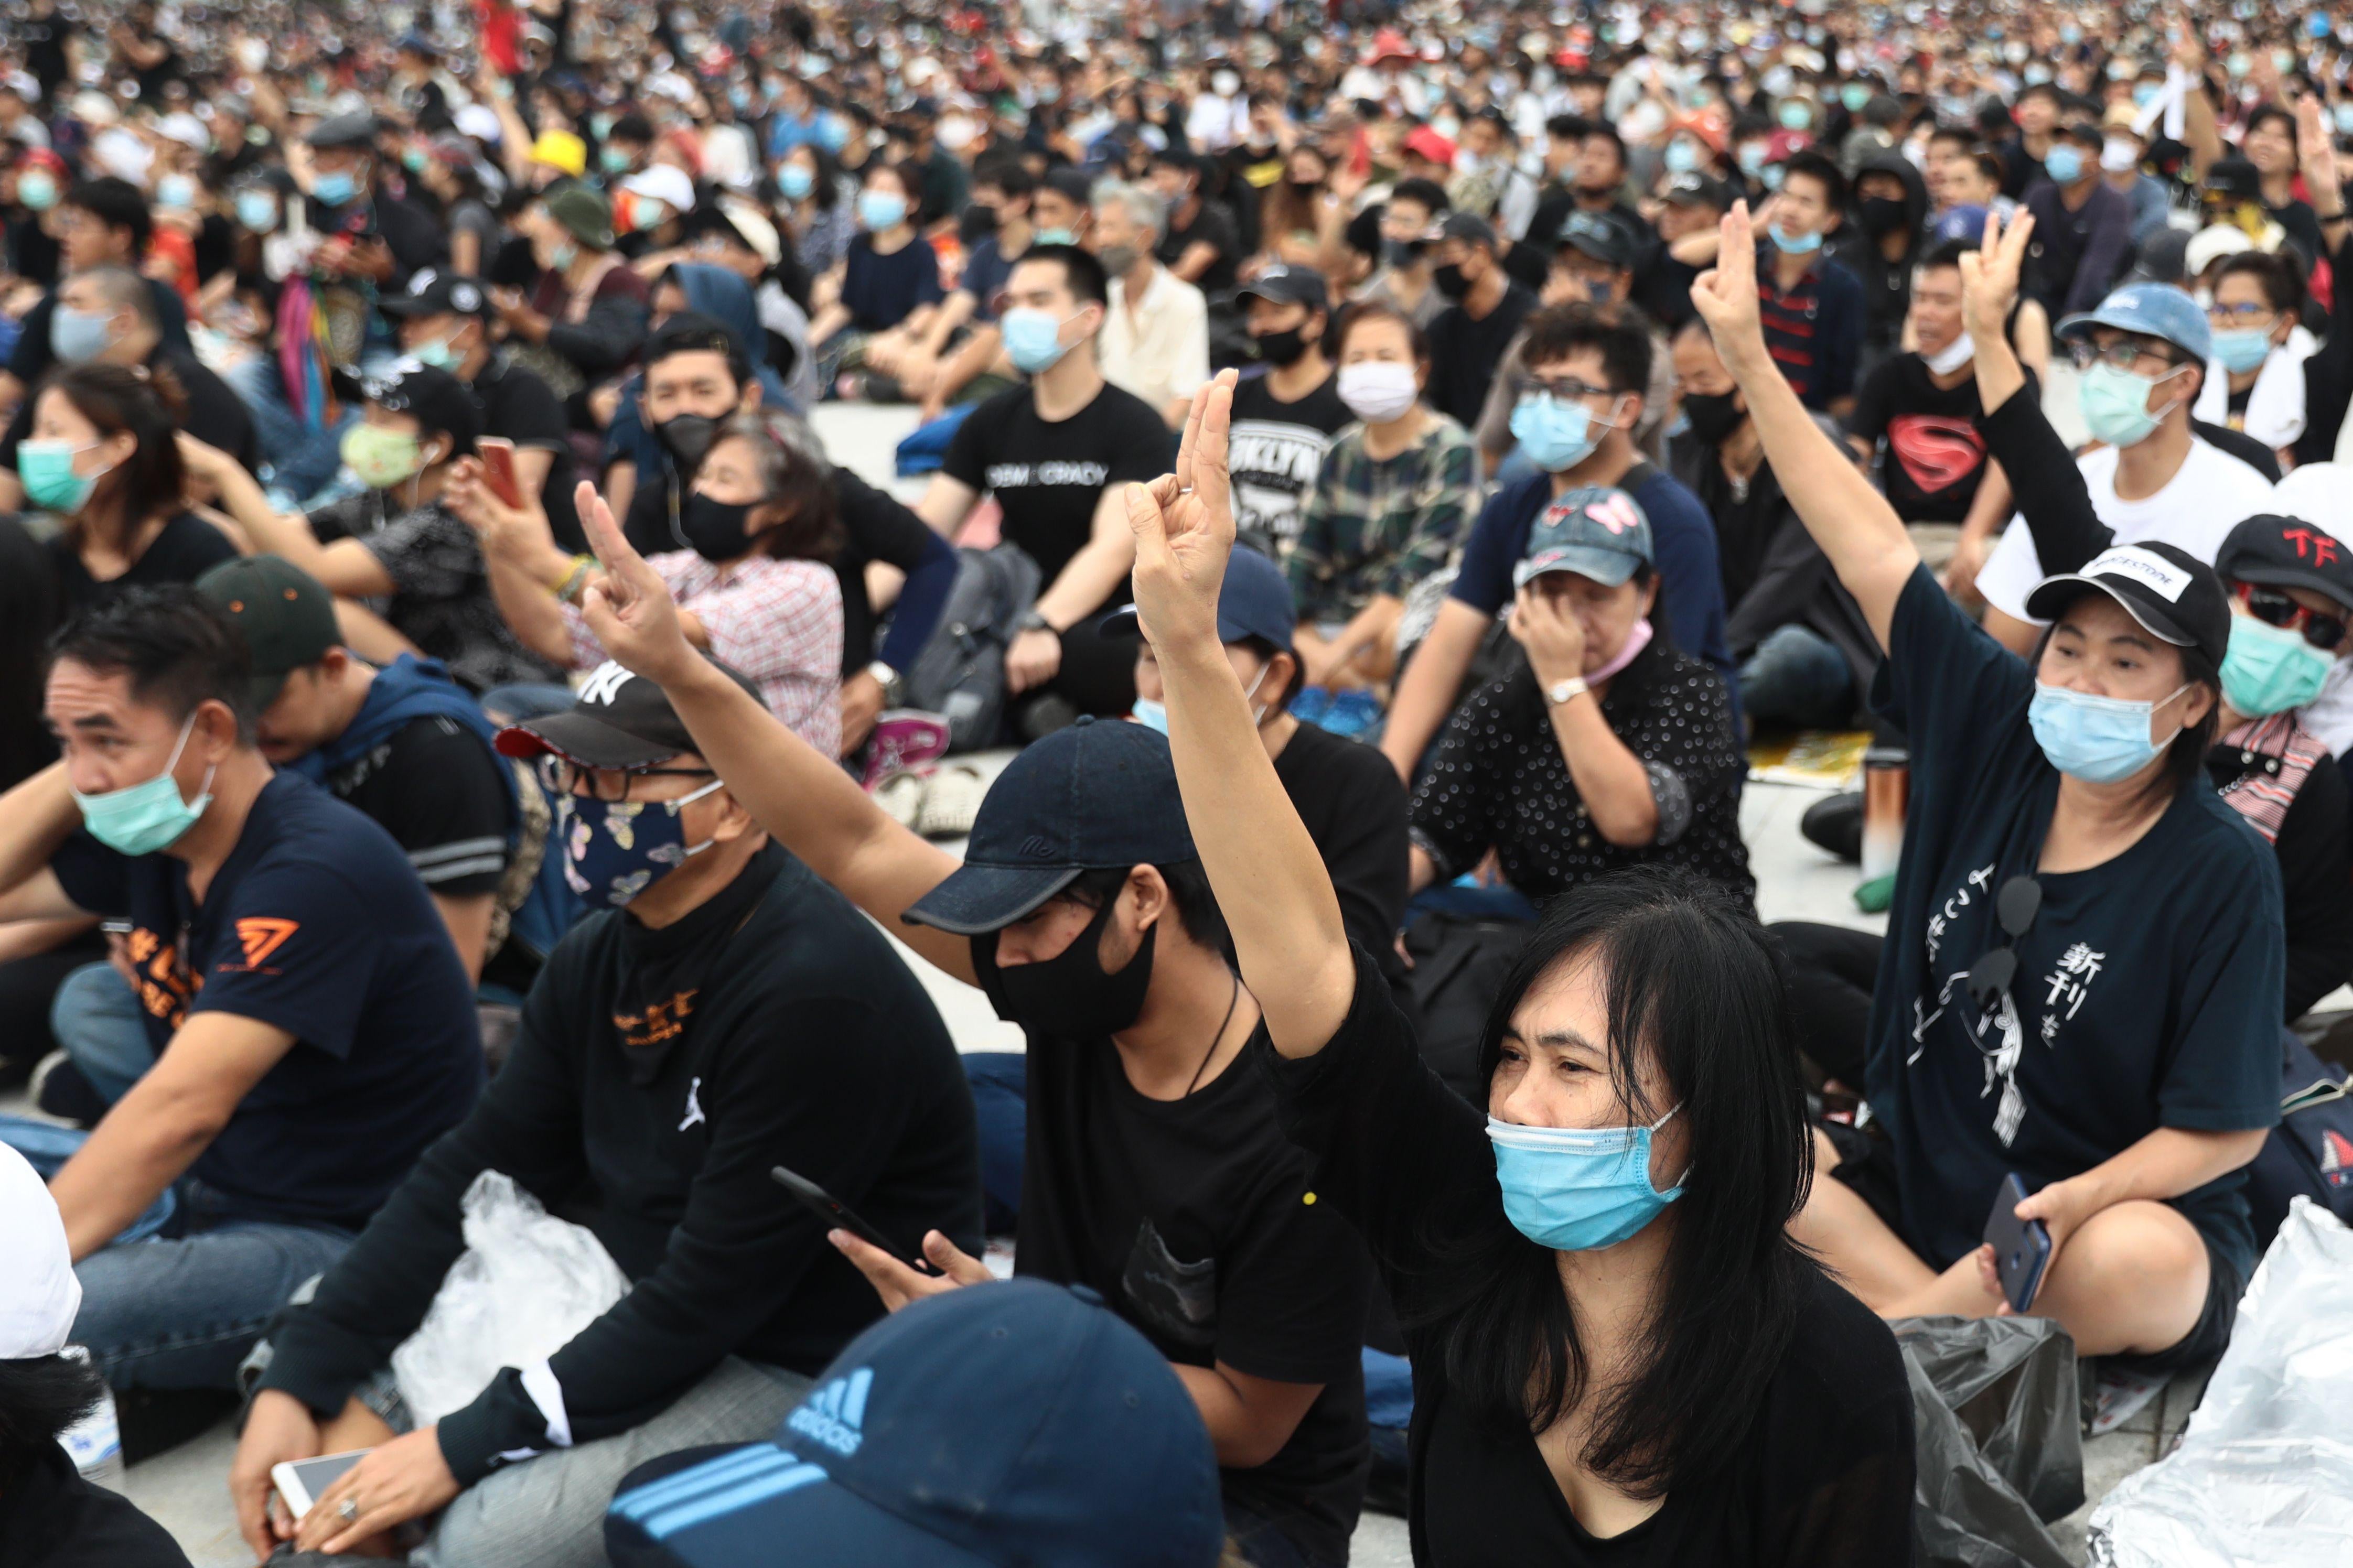 A large crowd of protesters sitting on the ground outside, wearing black T-shirts and masks. Many raise their right arms, holding up three fingers in the Hunger Games salute.